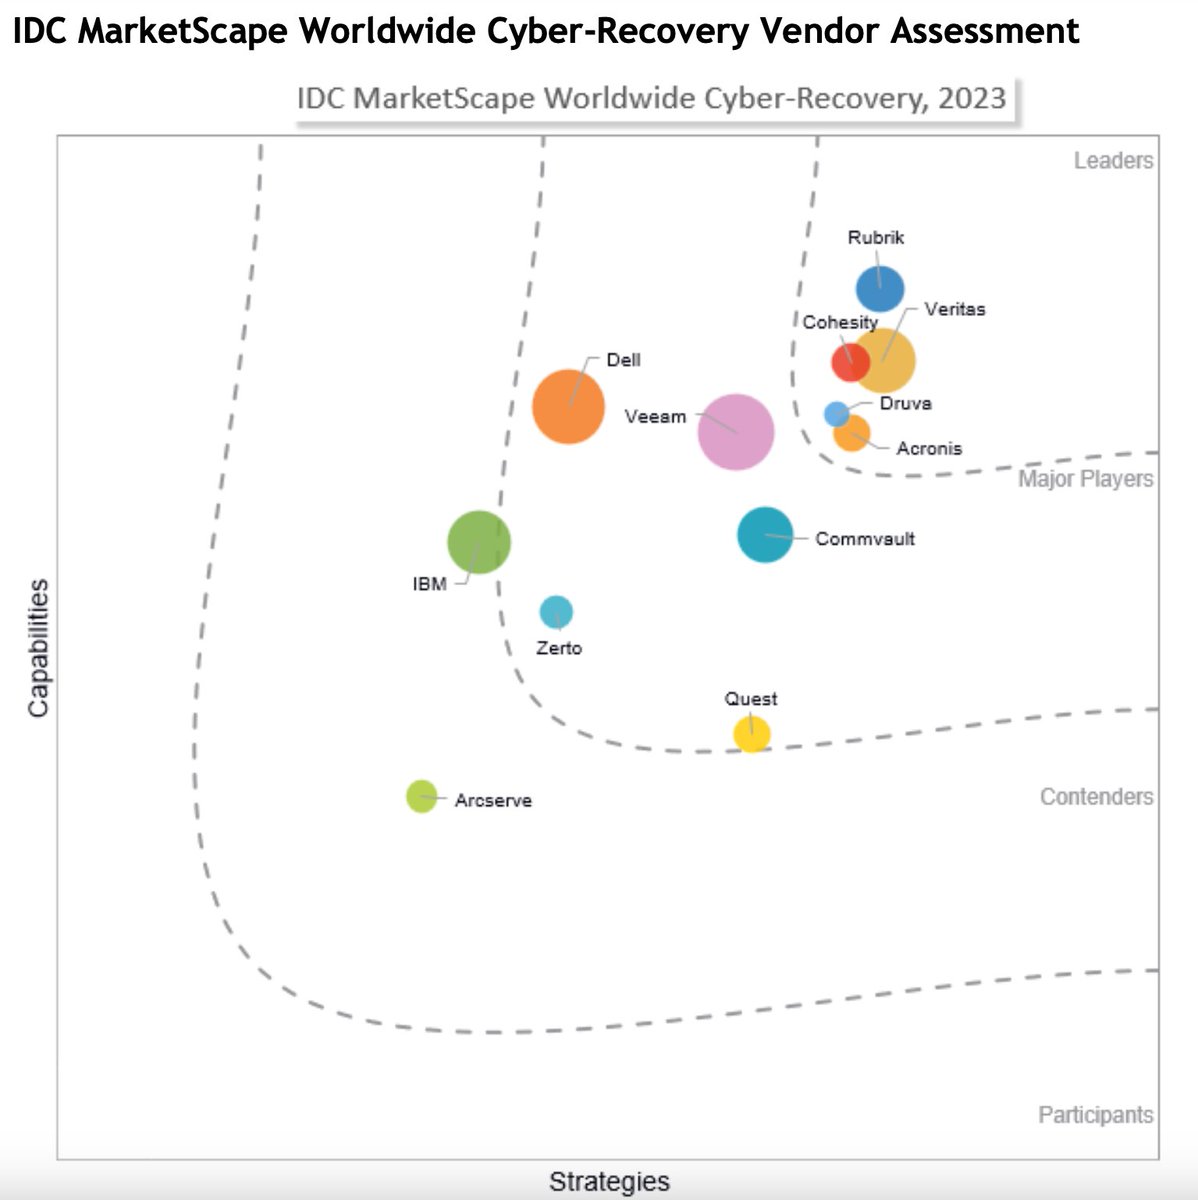 .@IDC has recognized Rubrik as a Leader in the inaugural IDC MarketScape for Worldwide Cyber Recovery! See we were recognized for our strengths in #data monitoring and visibility and extensive proactive #CyberSecurity posture capabilities here: rbrk.co/3G5AK61